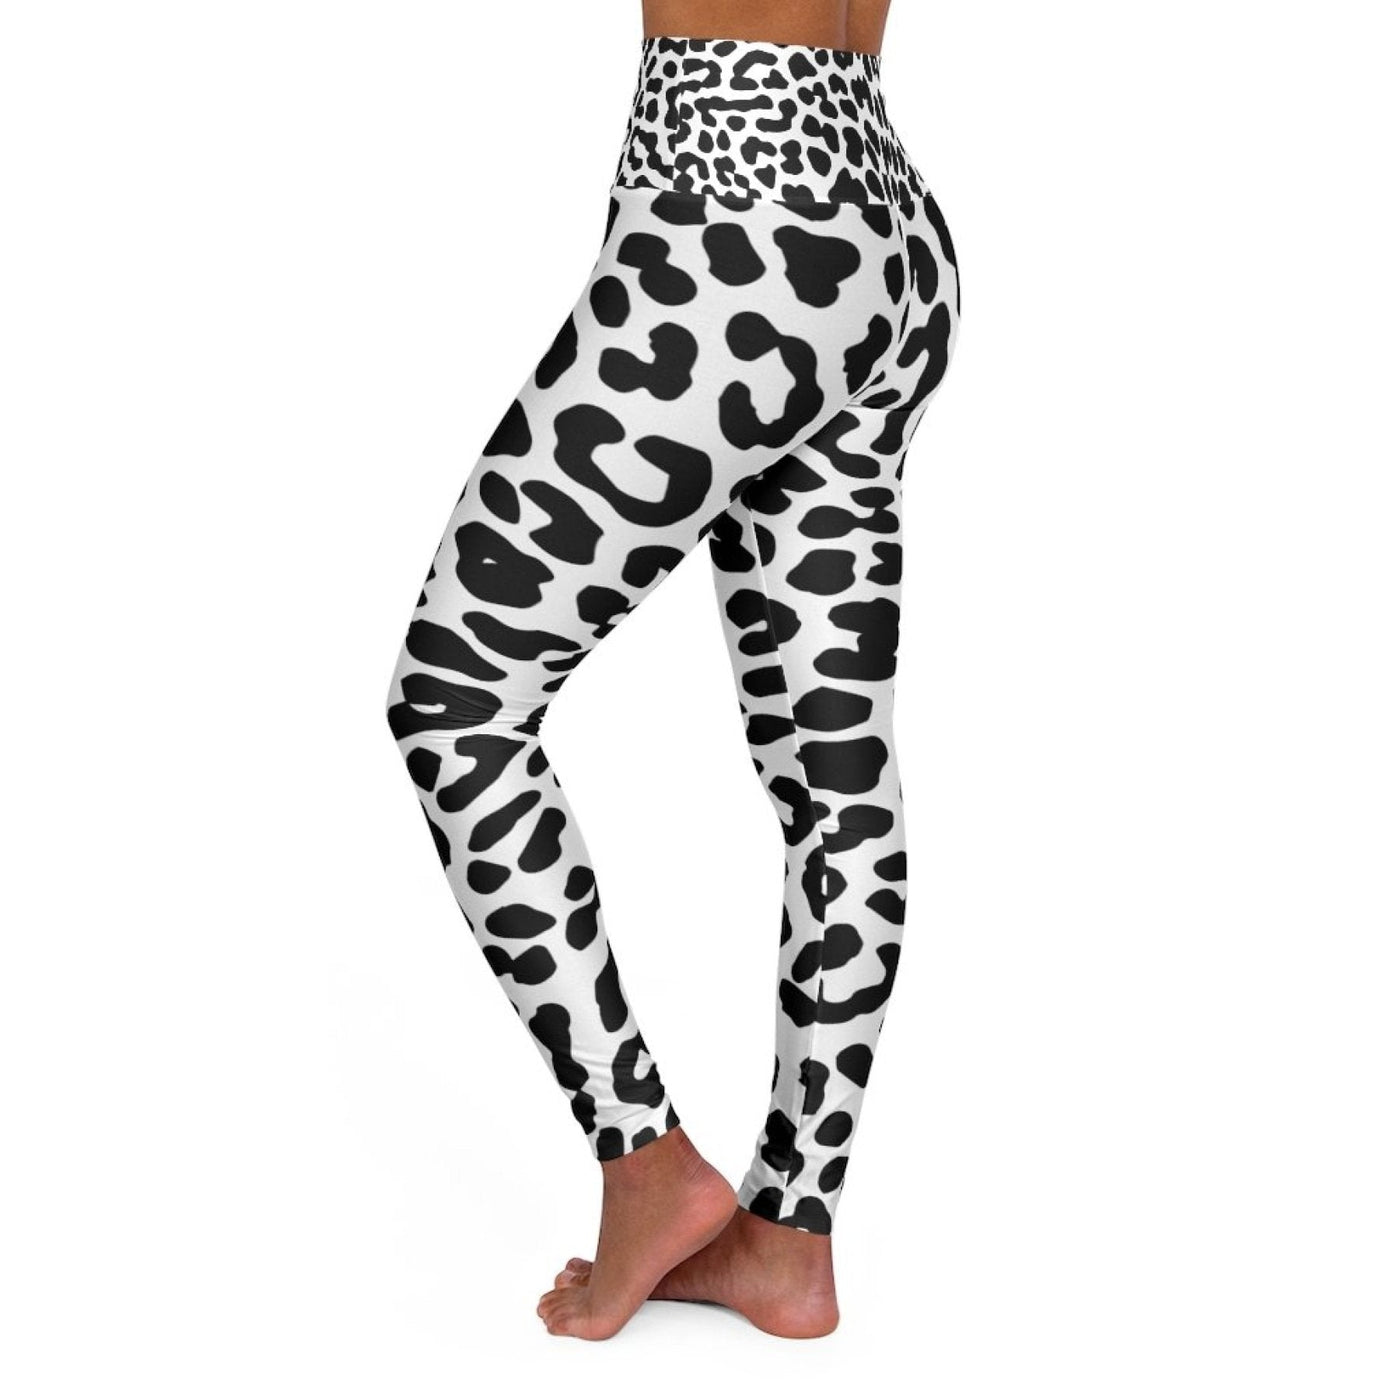 High Waisted Yoga Leggings Black And White Leopard Style Pants - Womens